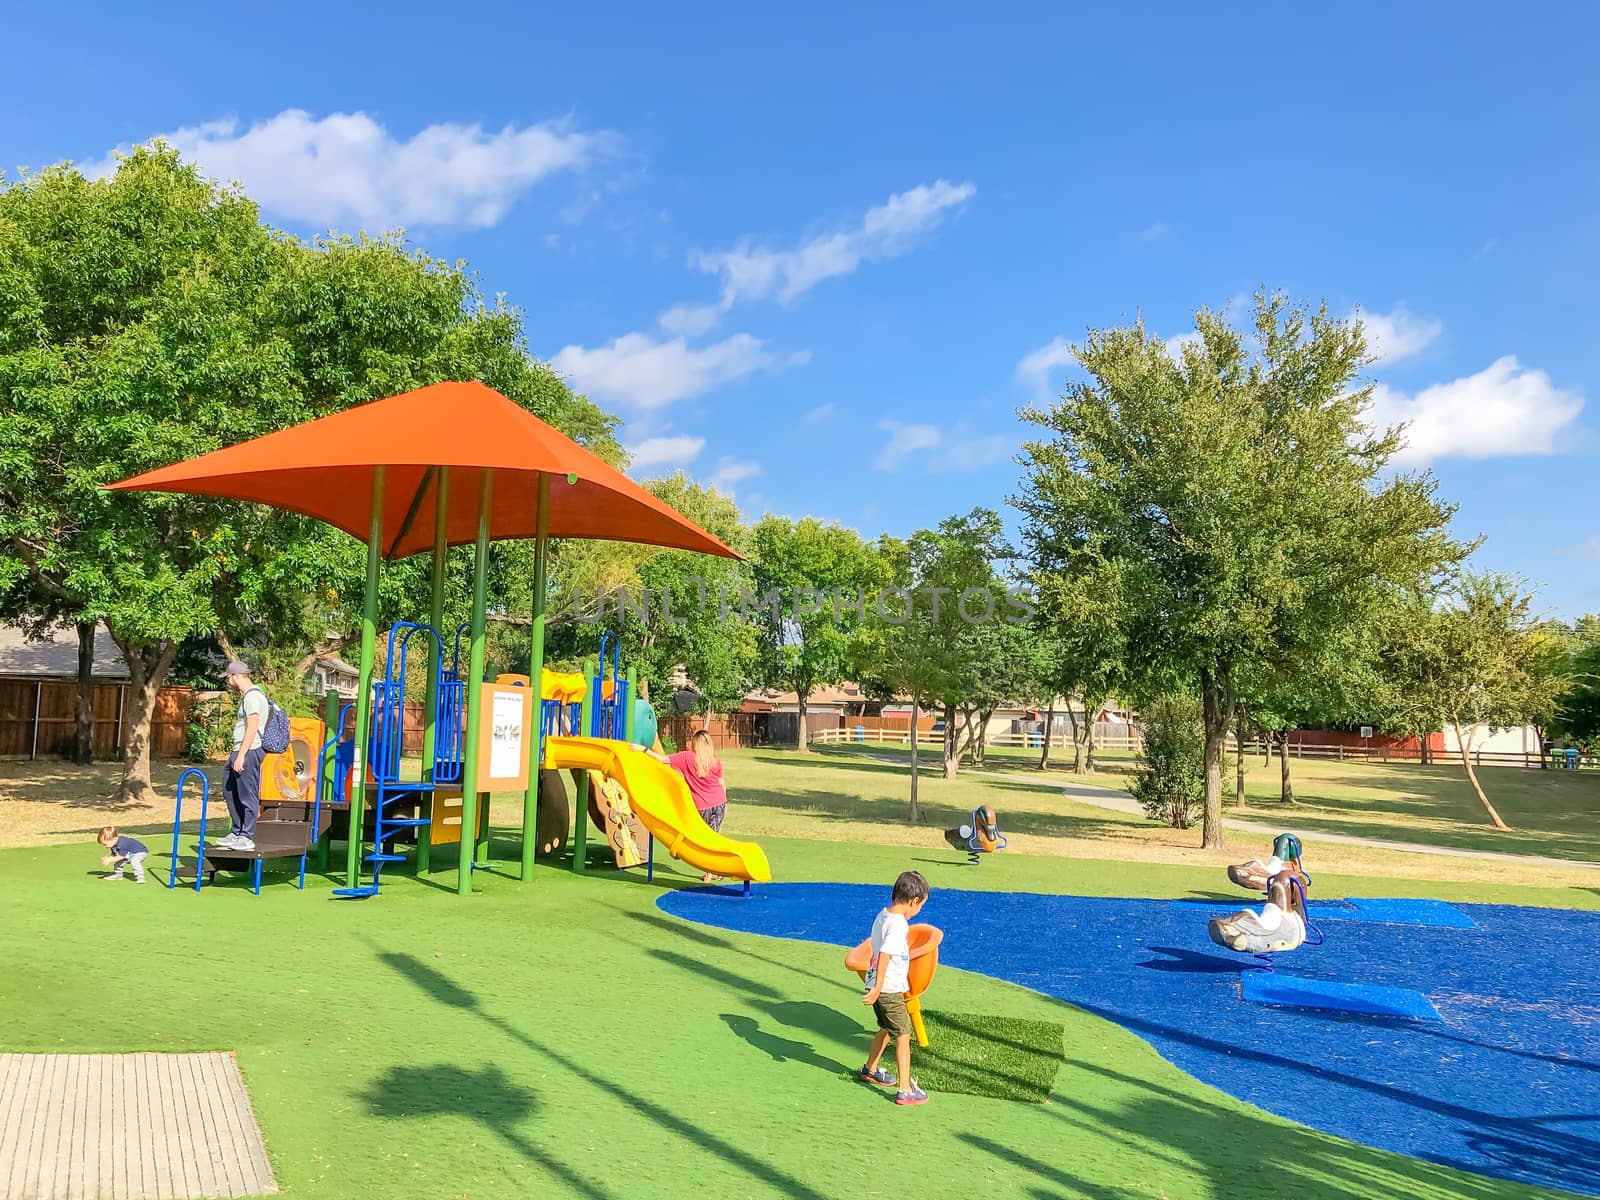 Modern playground with sun shade sails, artificial grass and kids playing in Flower Mound, Texas, USA by trongnguyen